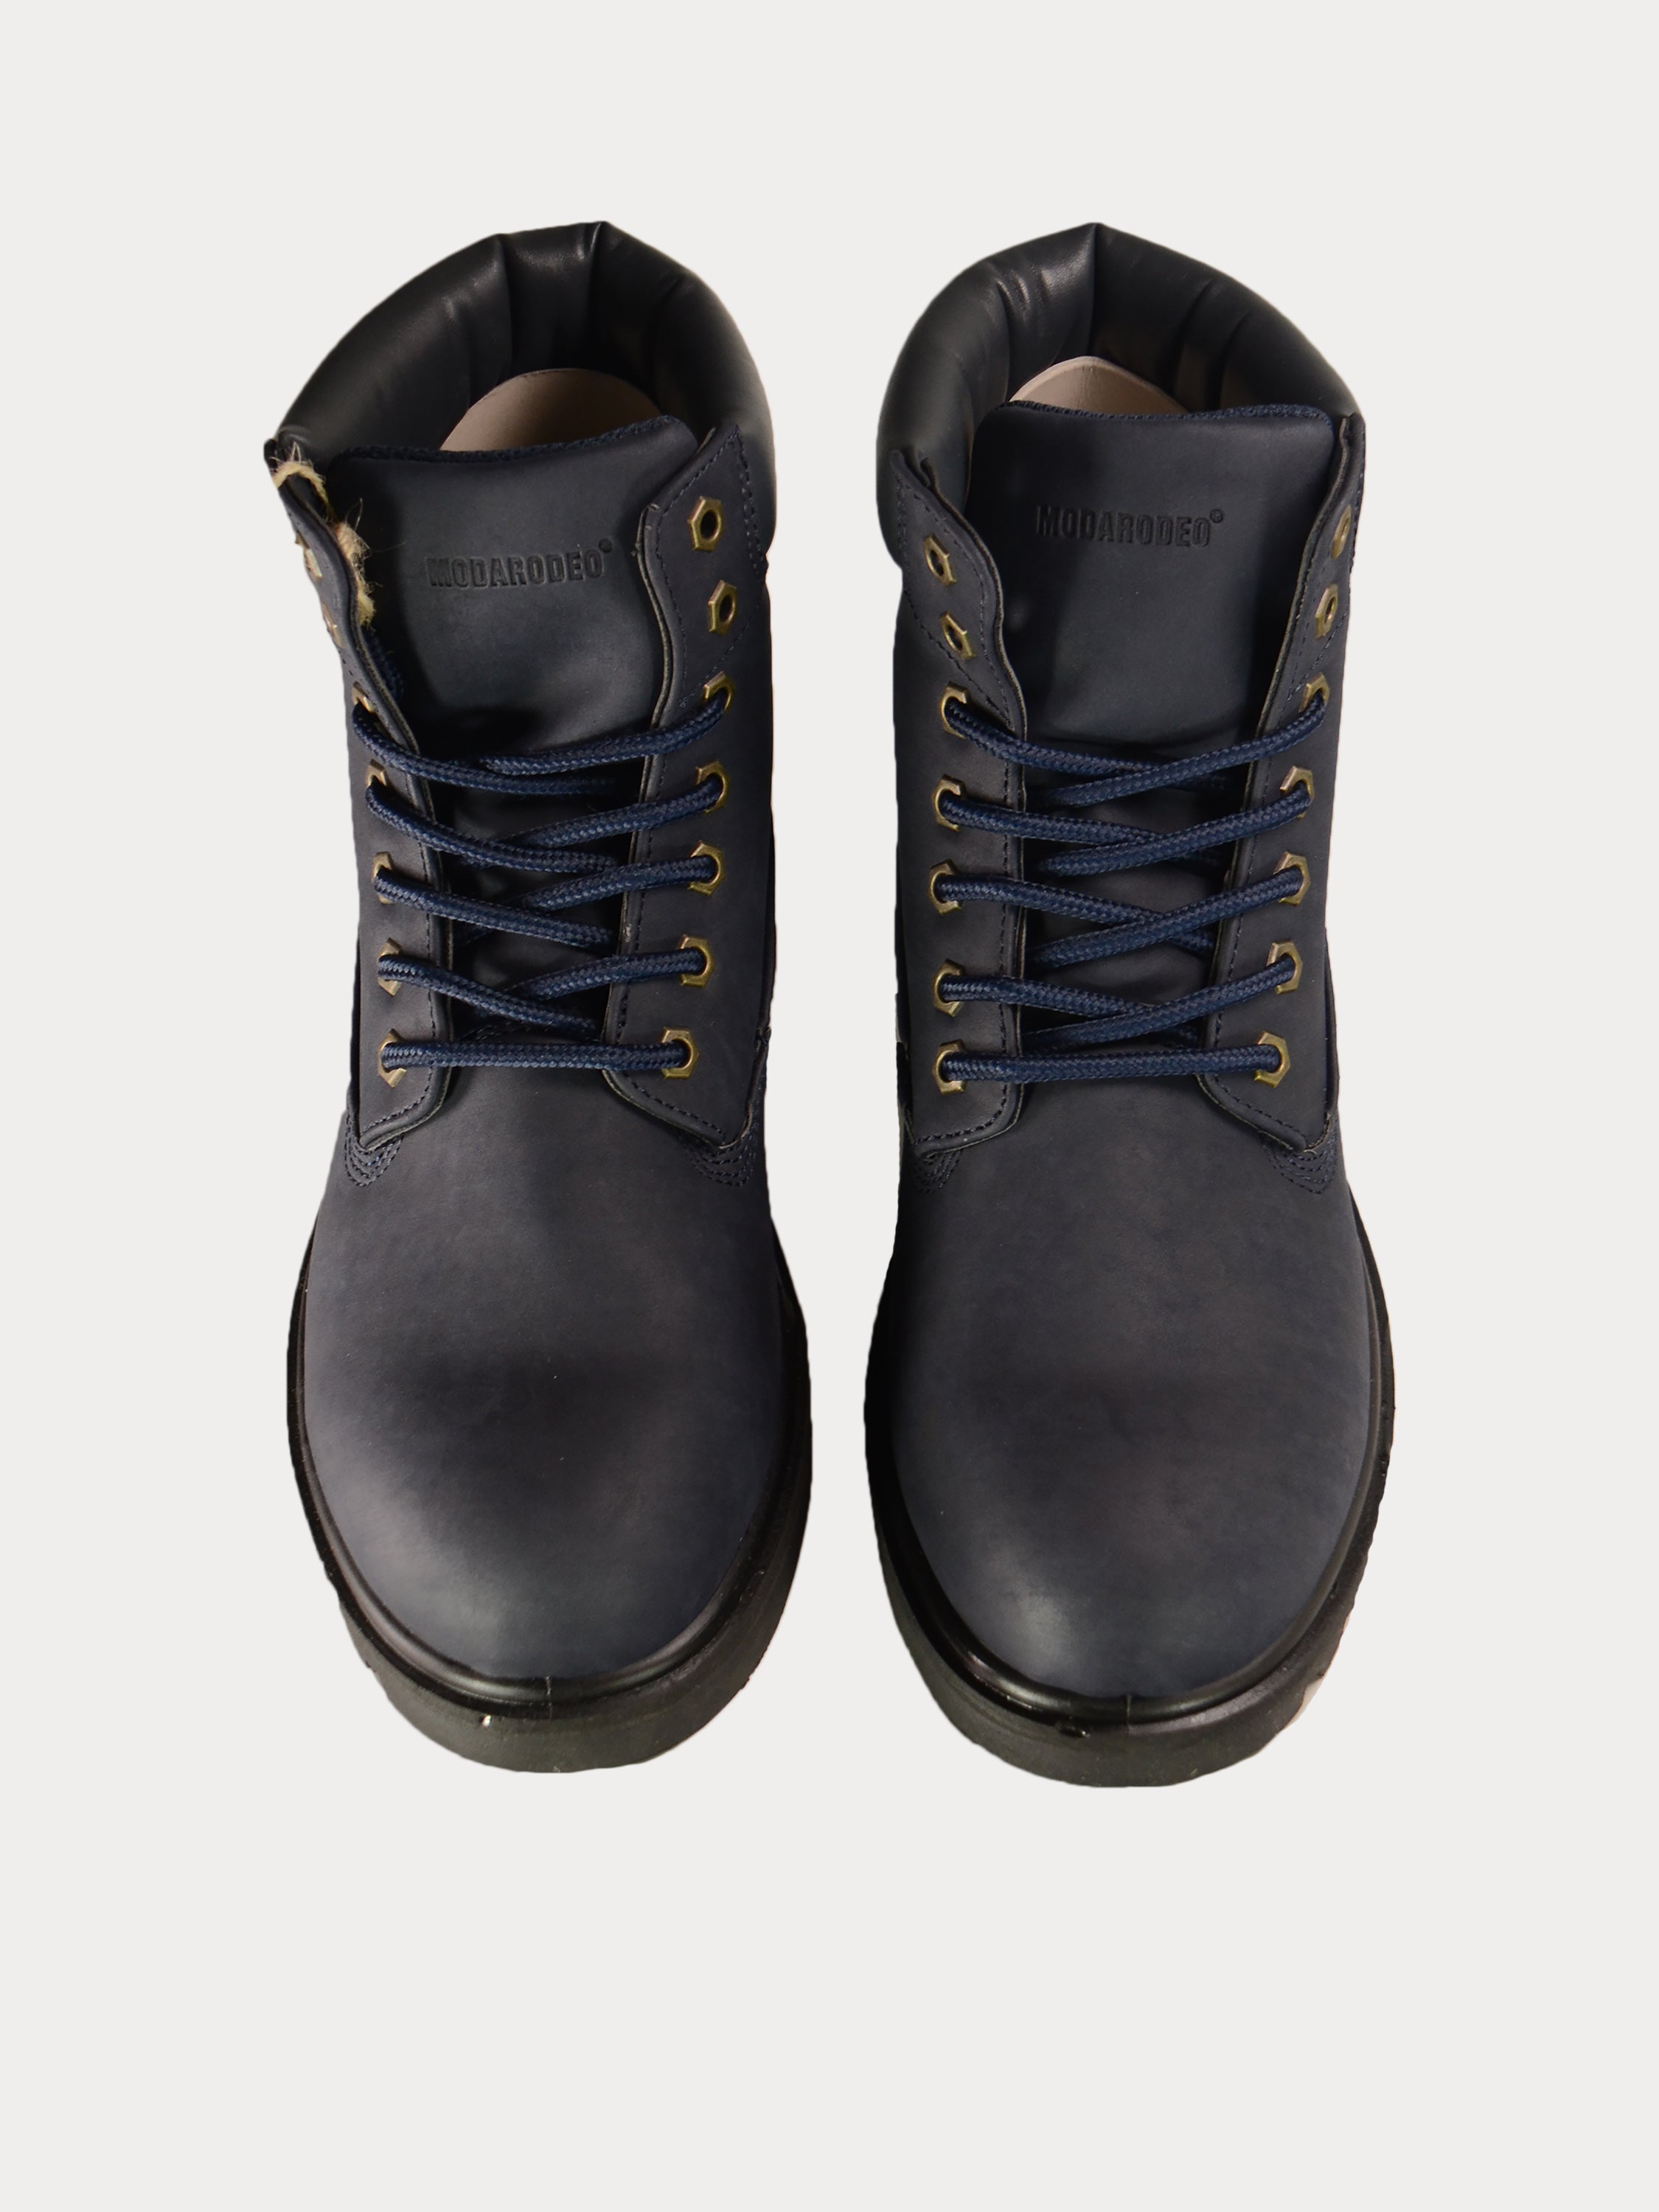 Modarodeo 027018 Men's Ankle Boots #color_Navy